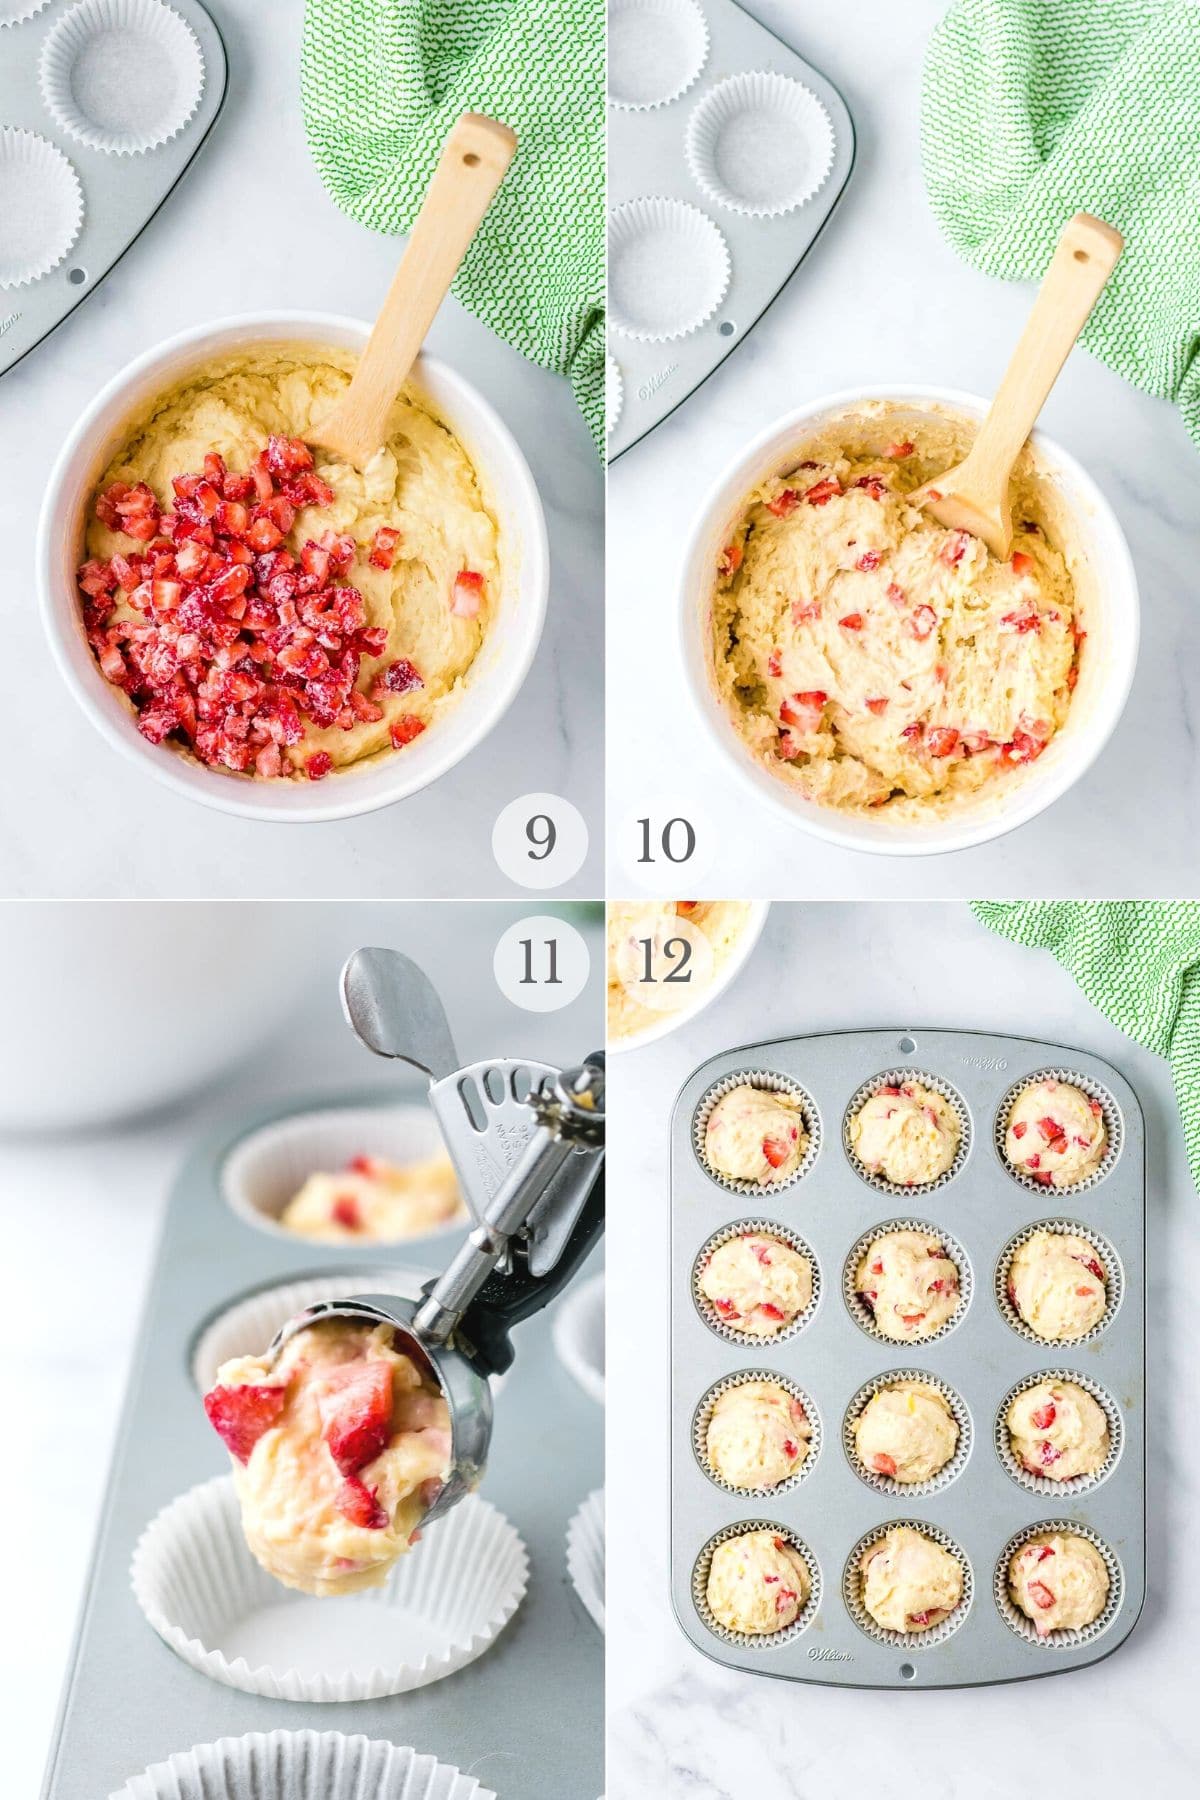 Strawberry Muffins recipes steps photos 9-12 (completing the batter and adding it to a muffin pan)